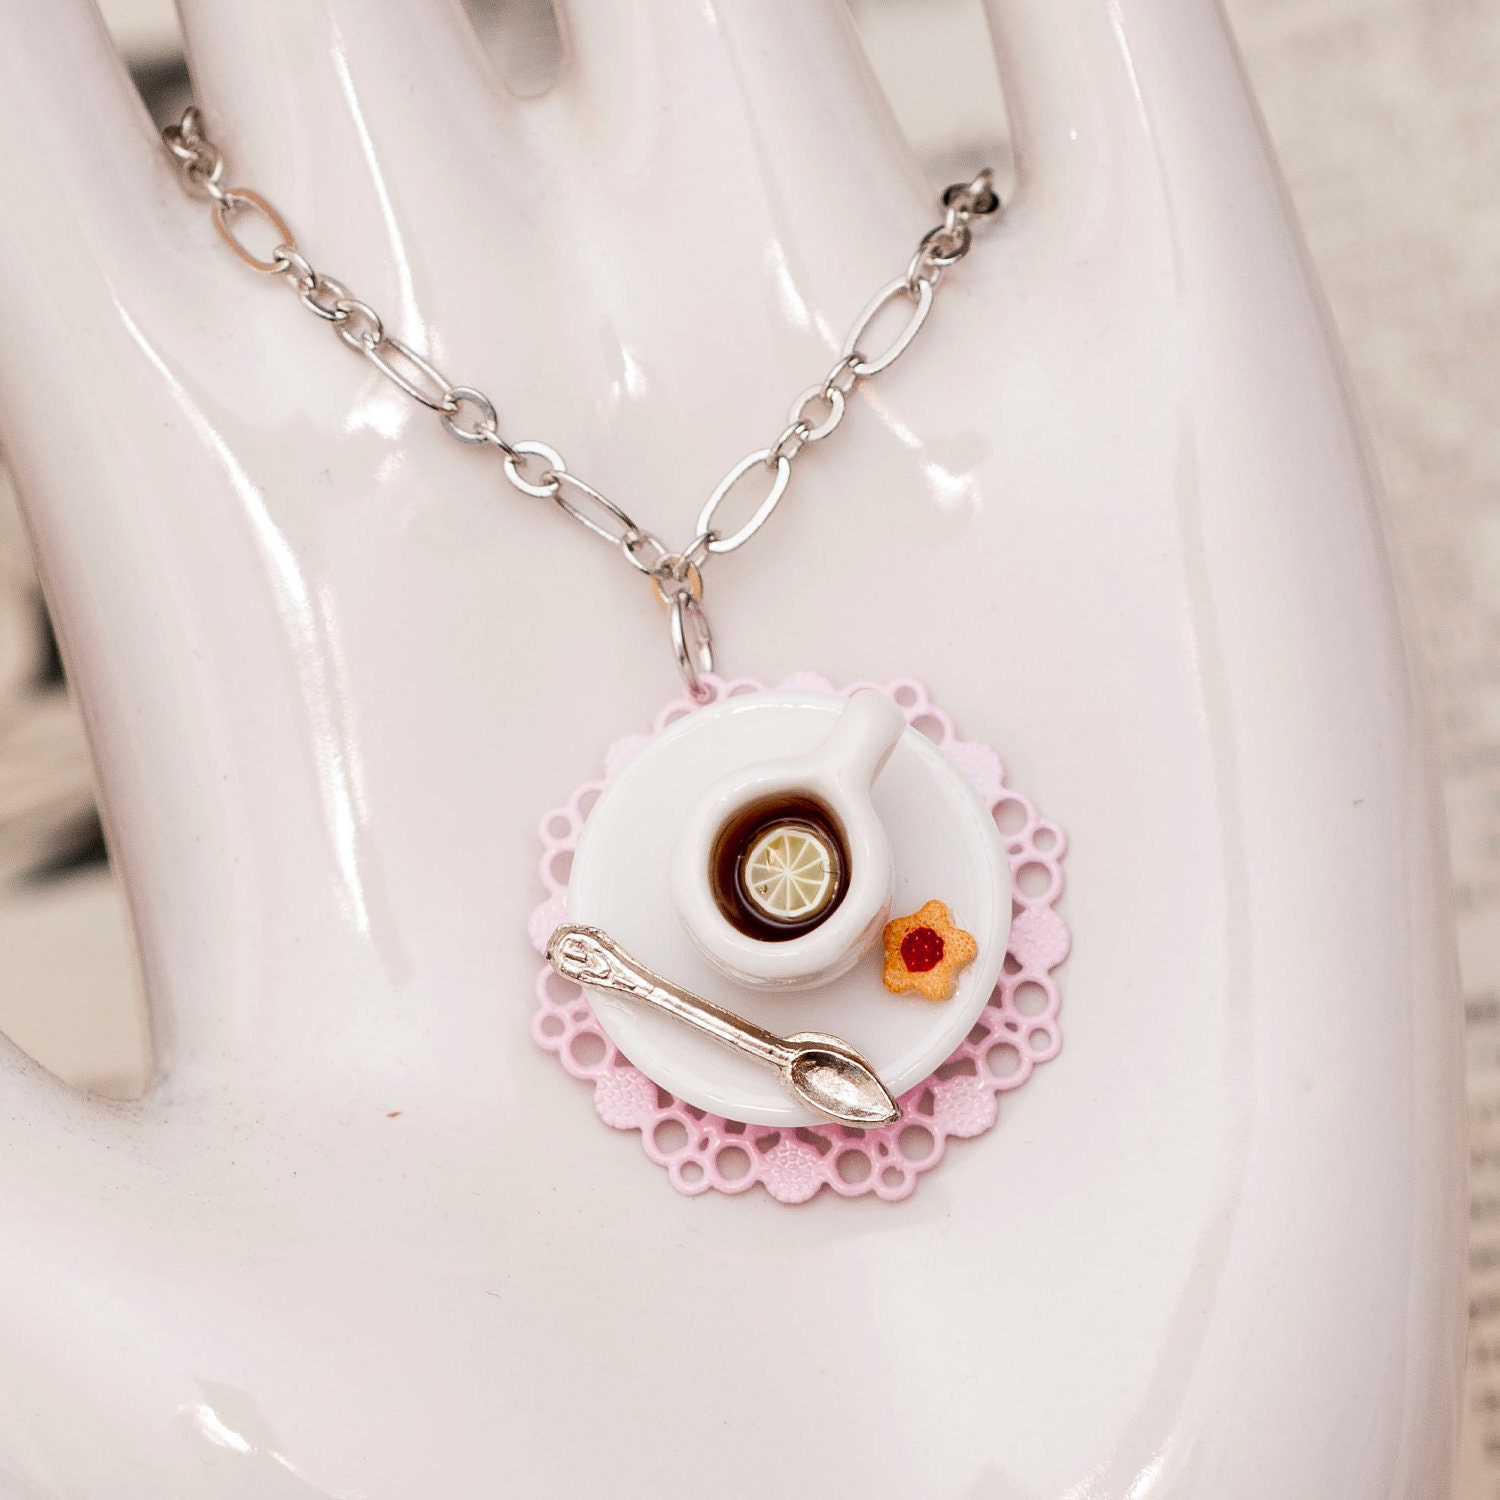 Roscata Pink Mini Tea Cup Necklace Pendant - For Lovers of Tiny Things